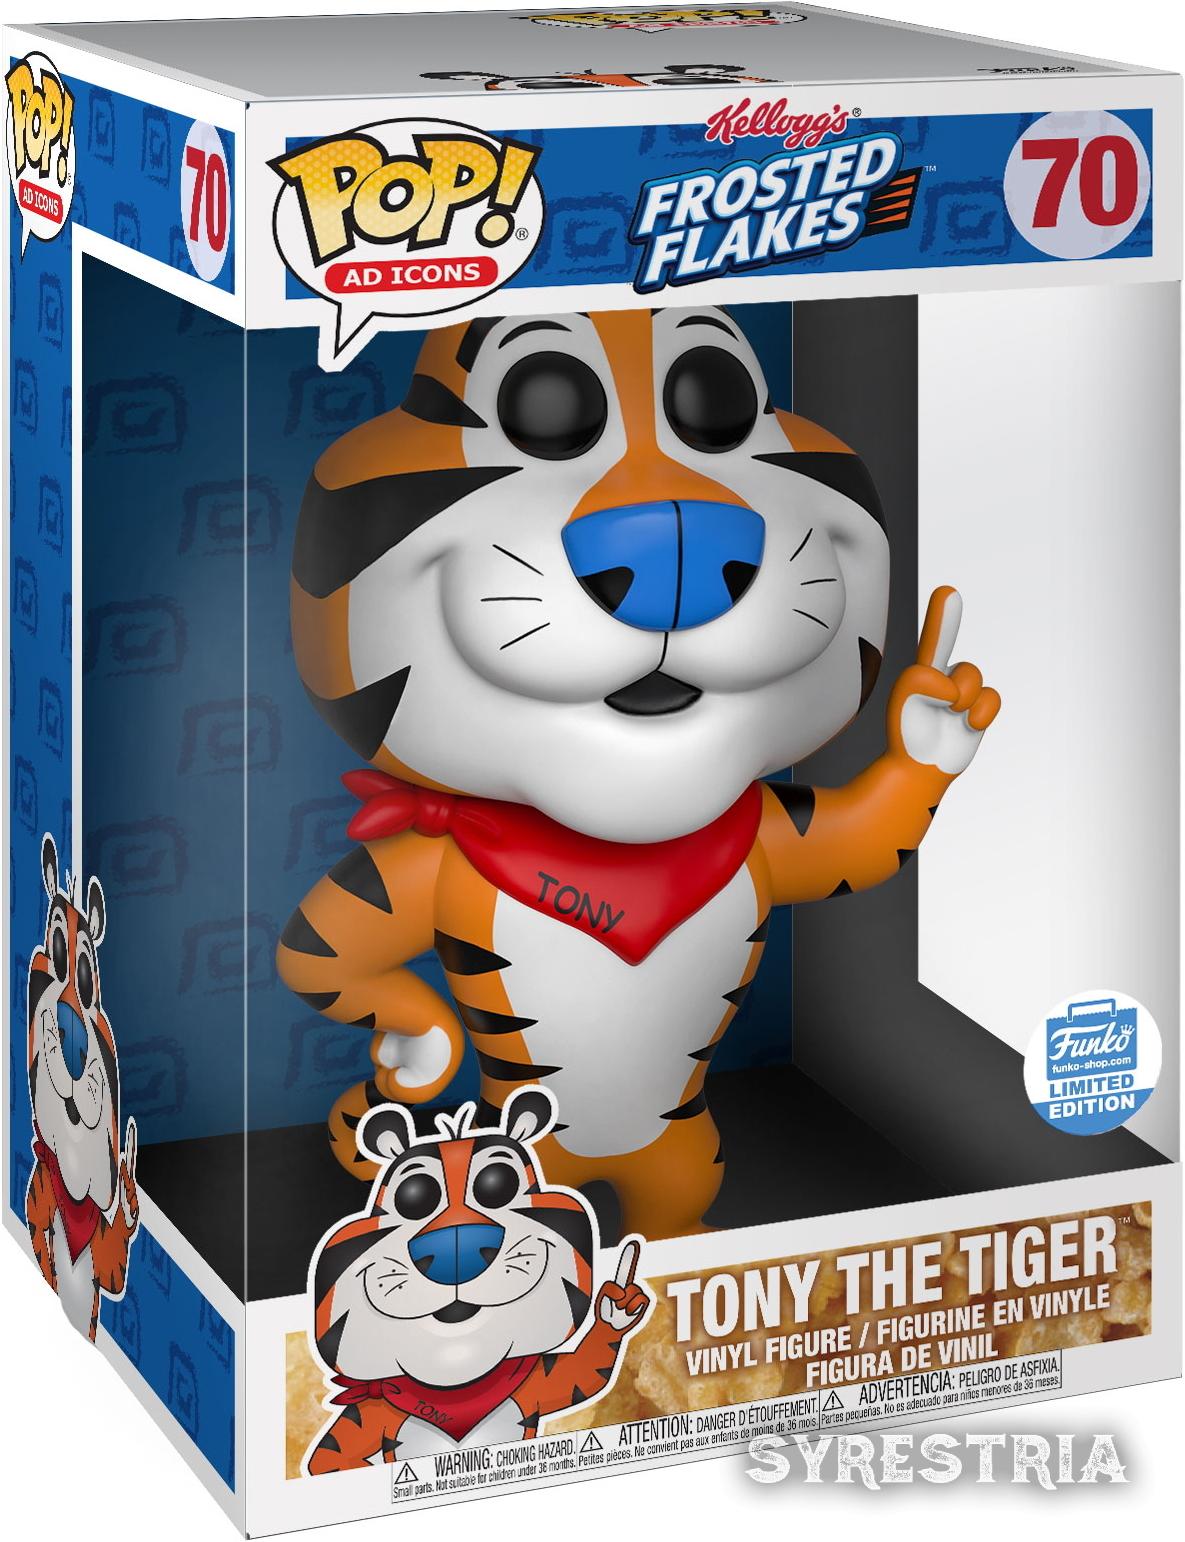 Kellogg's Frosted Flakes - Tony The Tiger 70 Shop Limited Edition - Funko Pop! - Vinyl Figur